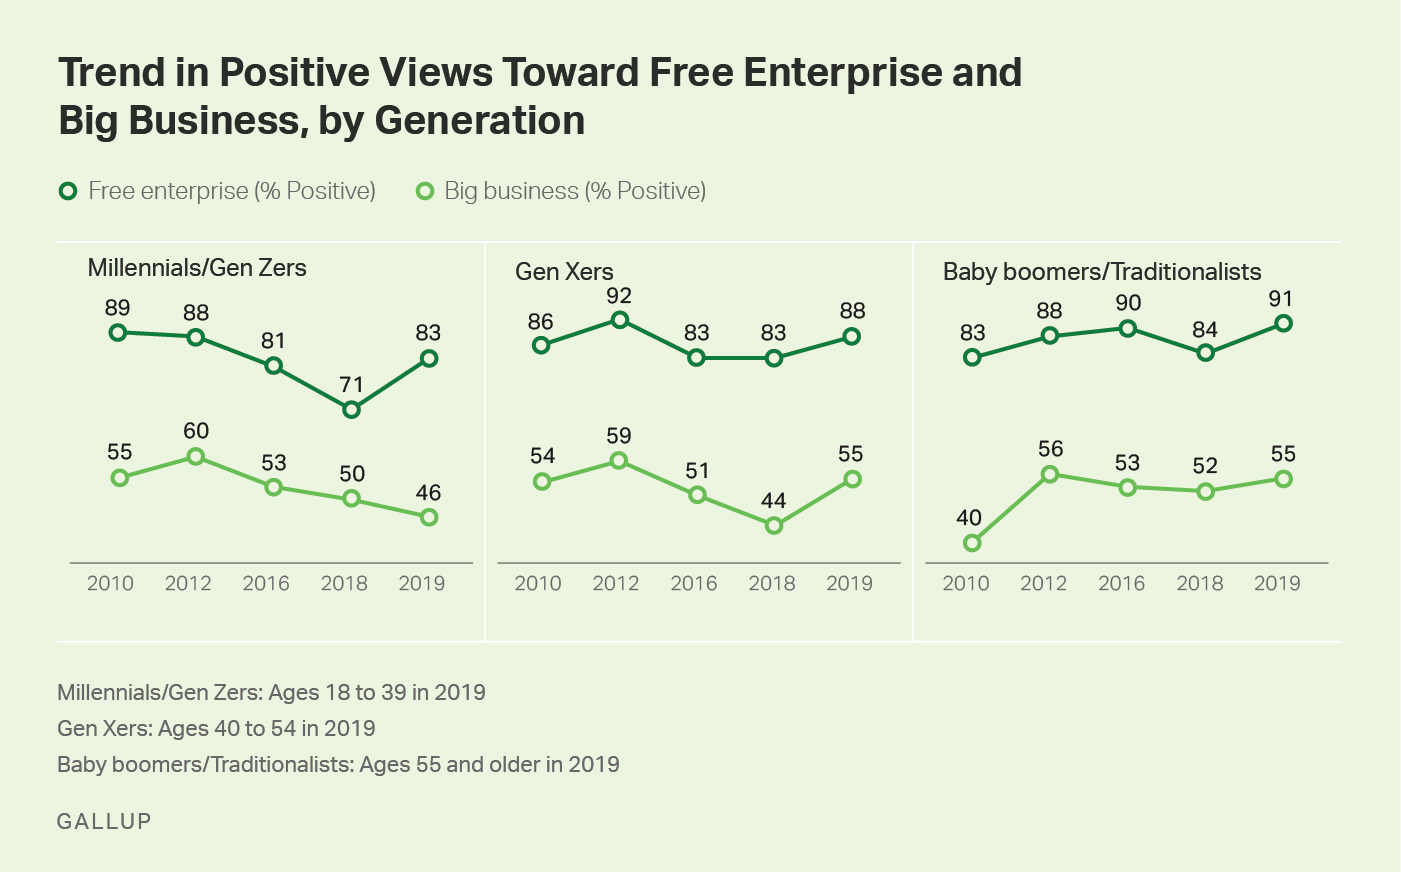 Three line graphs showing 2010-2019 trends in positive ratings for free enterprise and big business, by generational group.